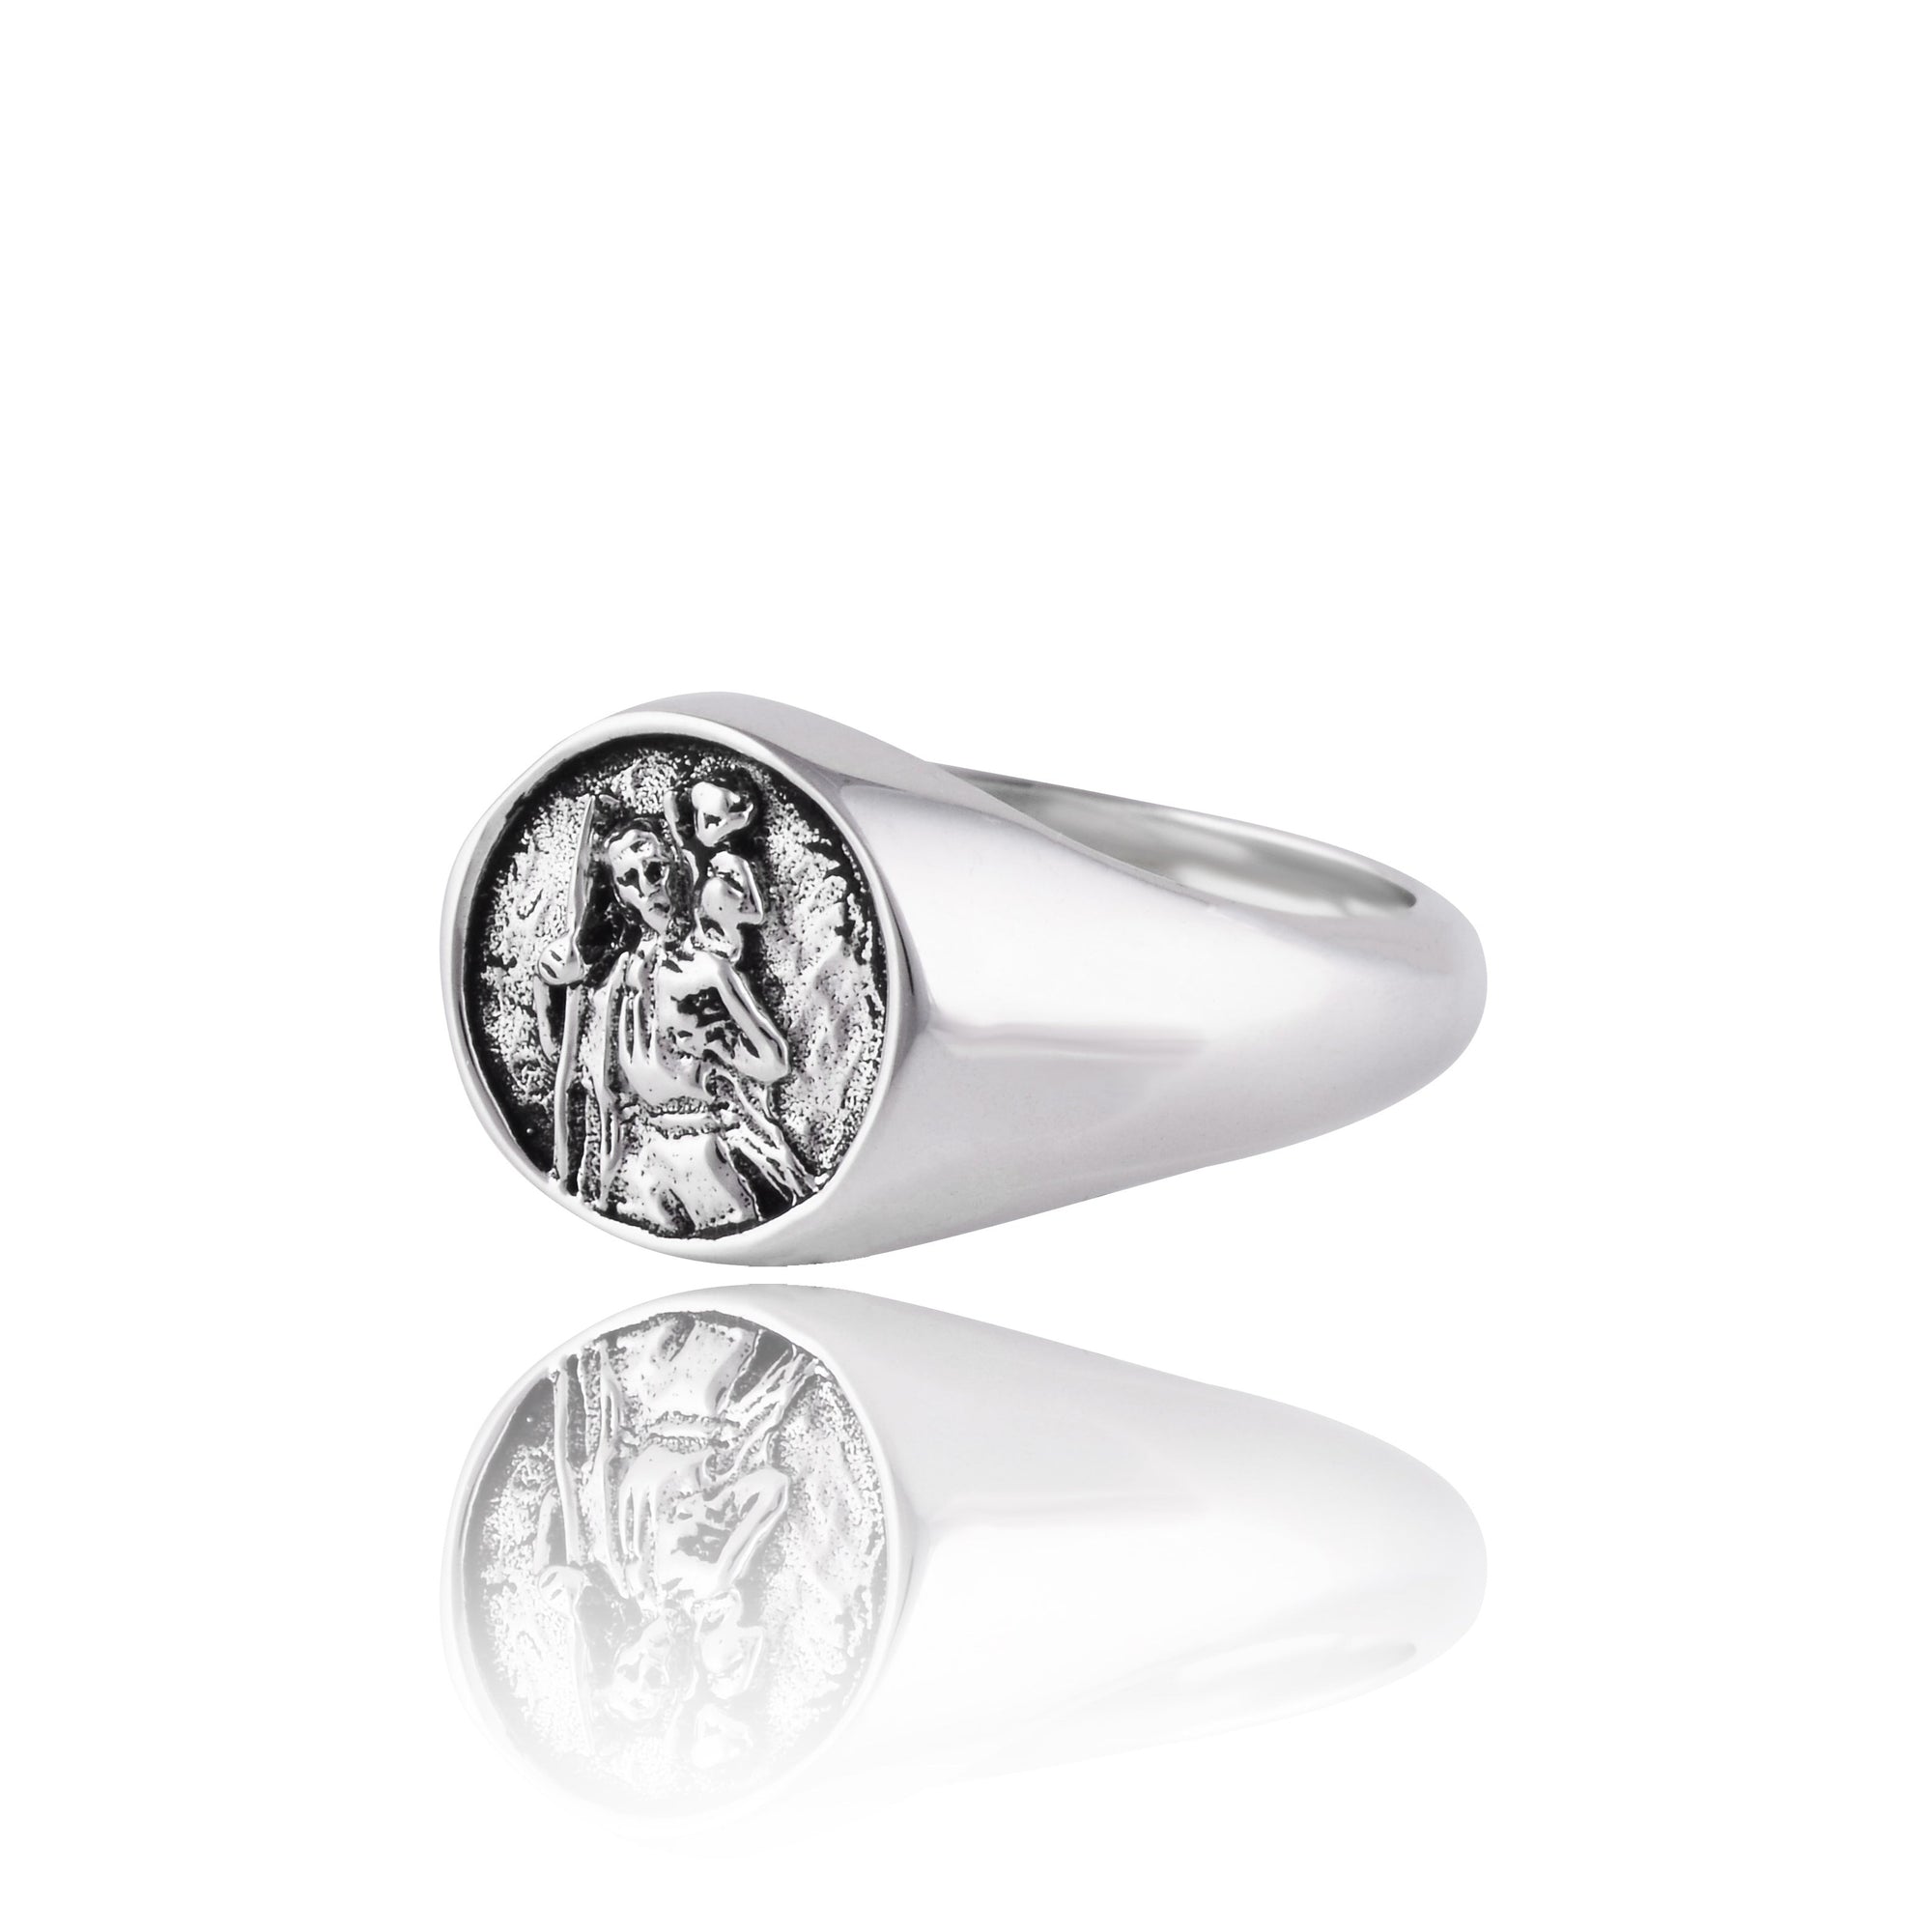 St Christopher Signet Ring - Silver